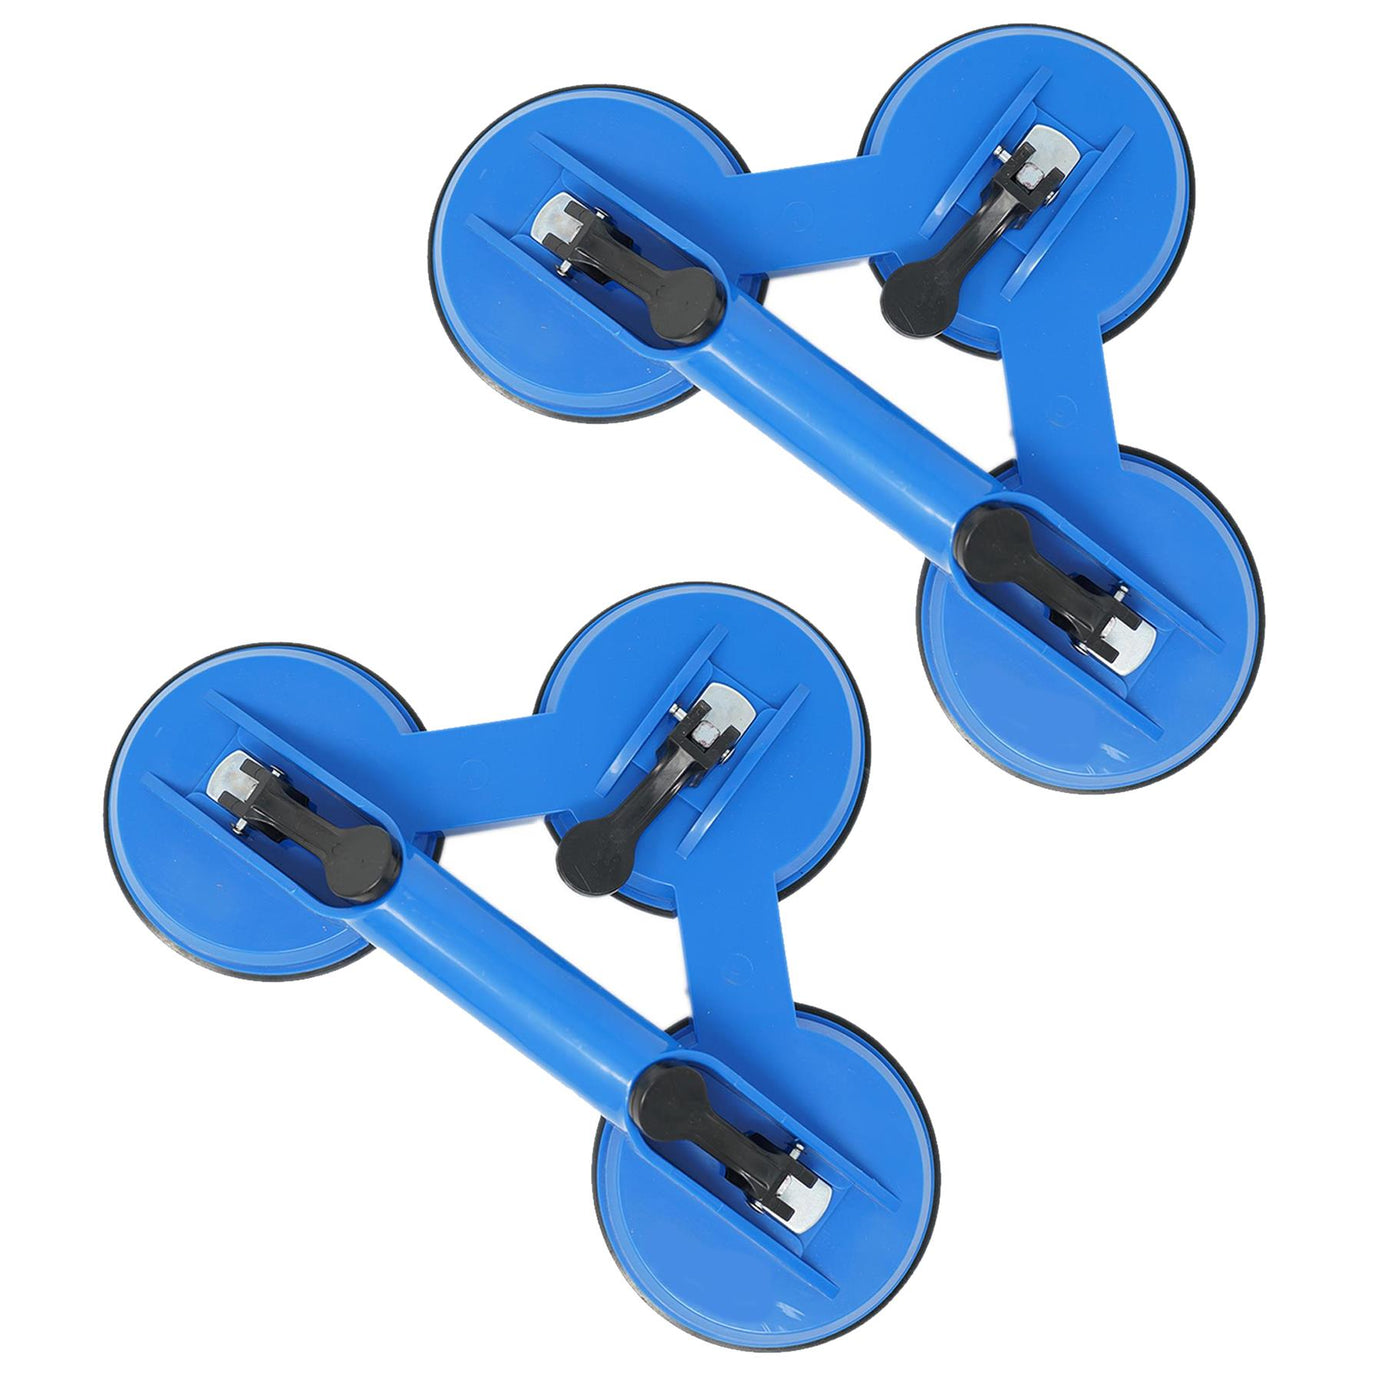 Triple Suction Cup Pad Lifter